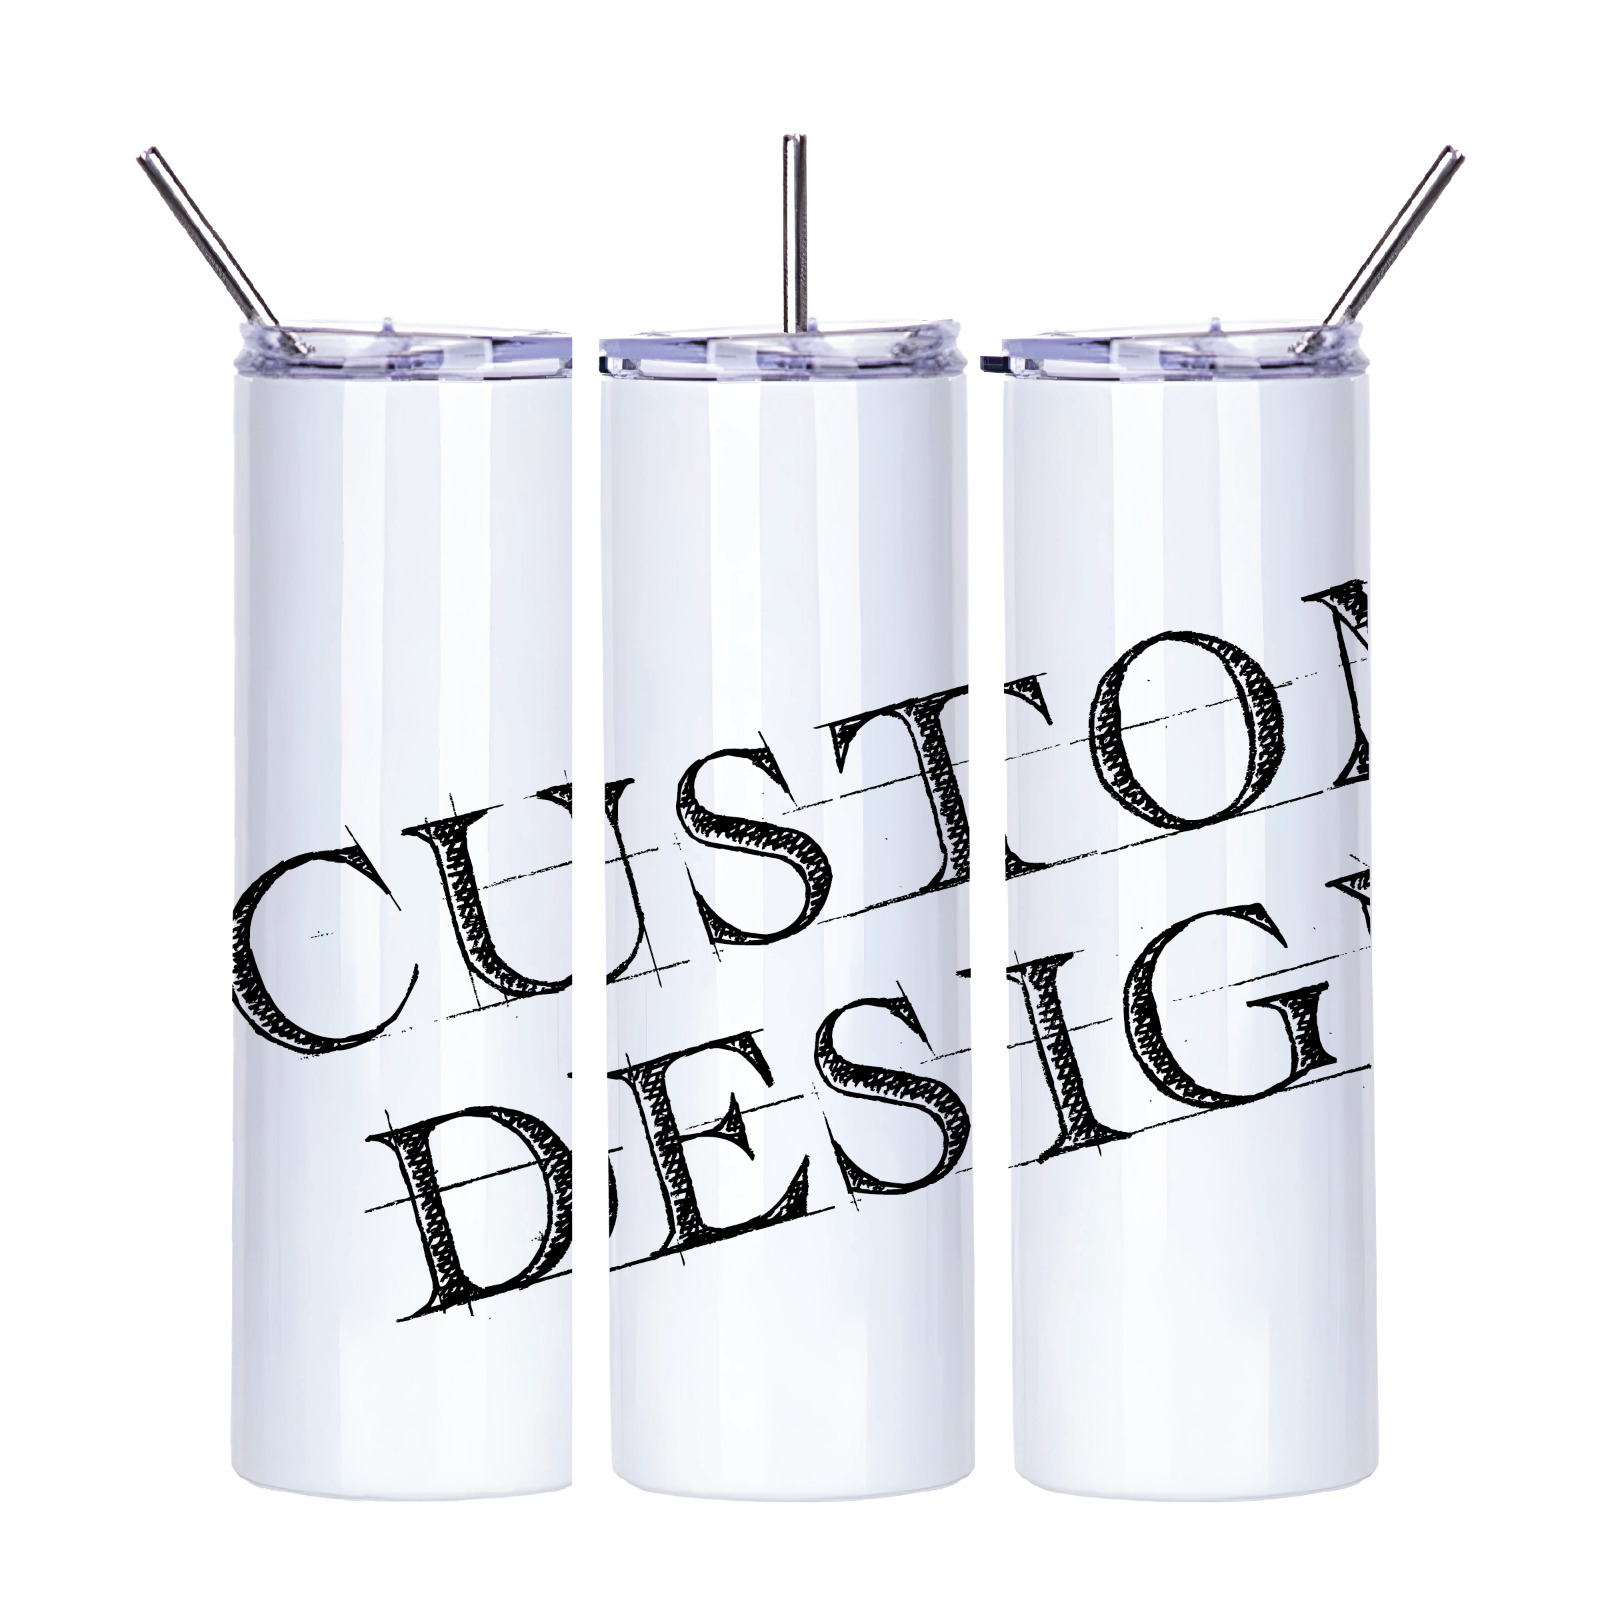 Build your own custom design sublimated on Insulated 20oz Skinny Tumbler Mug Cup